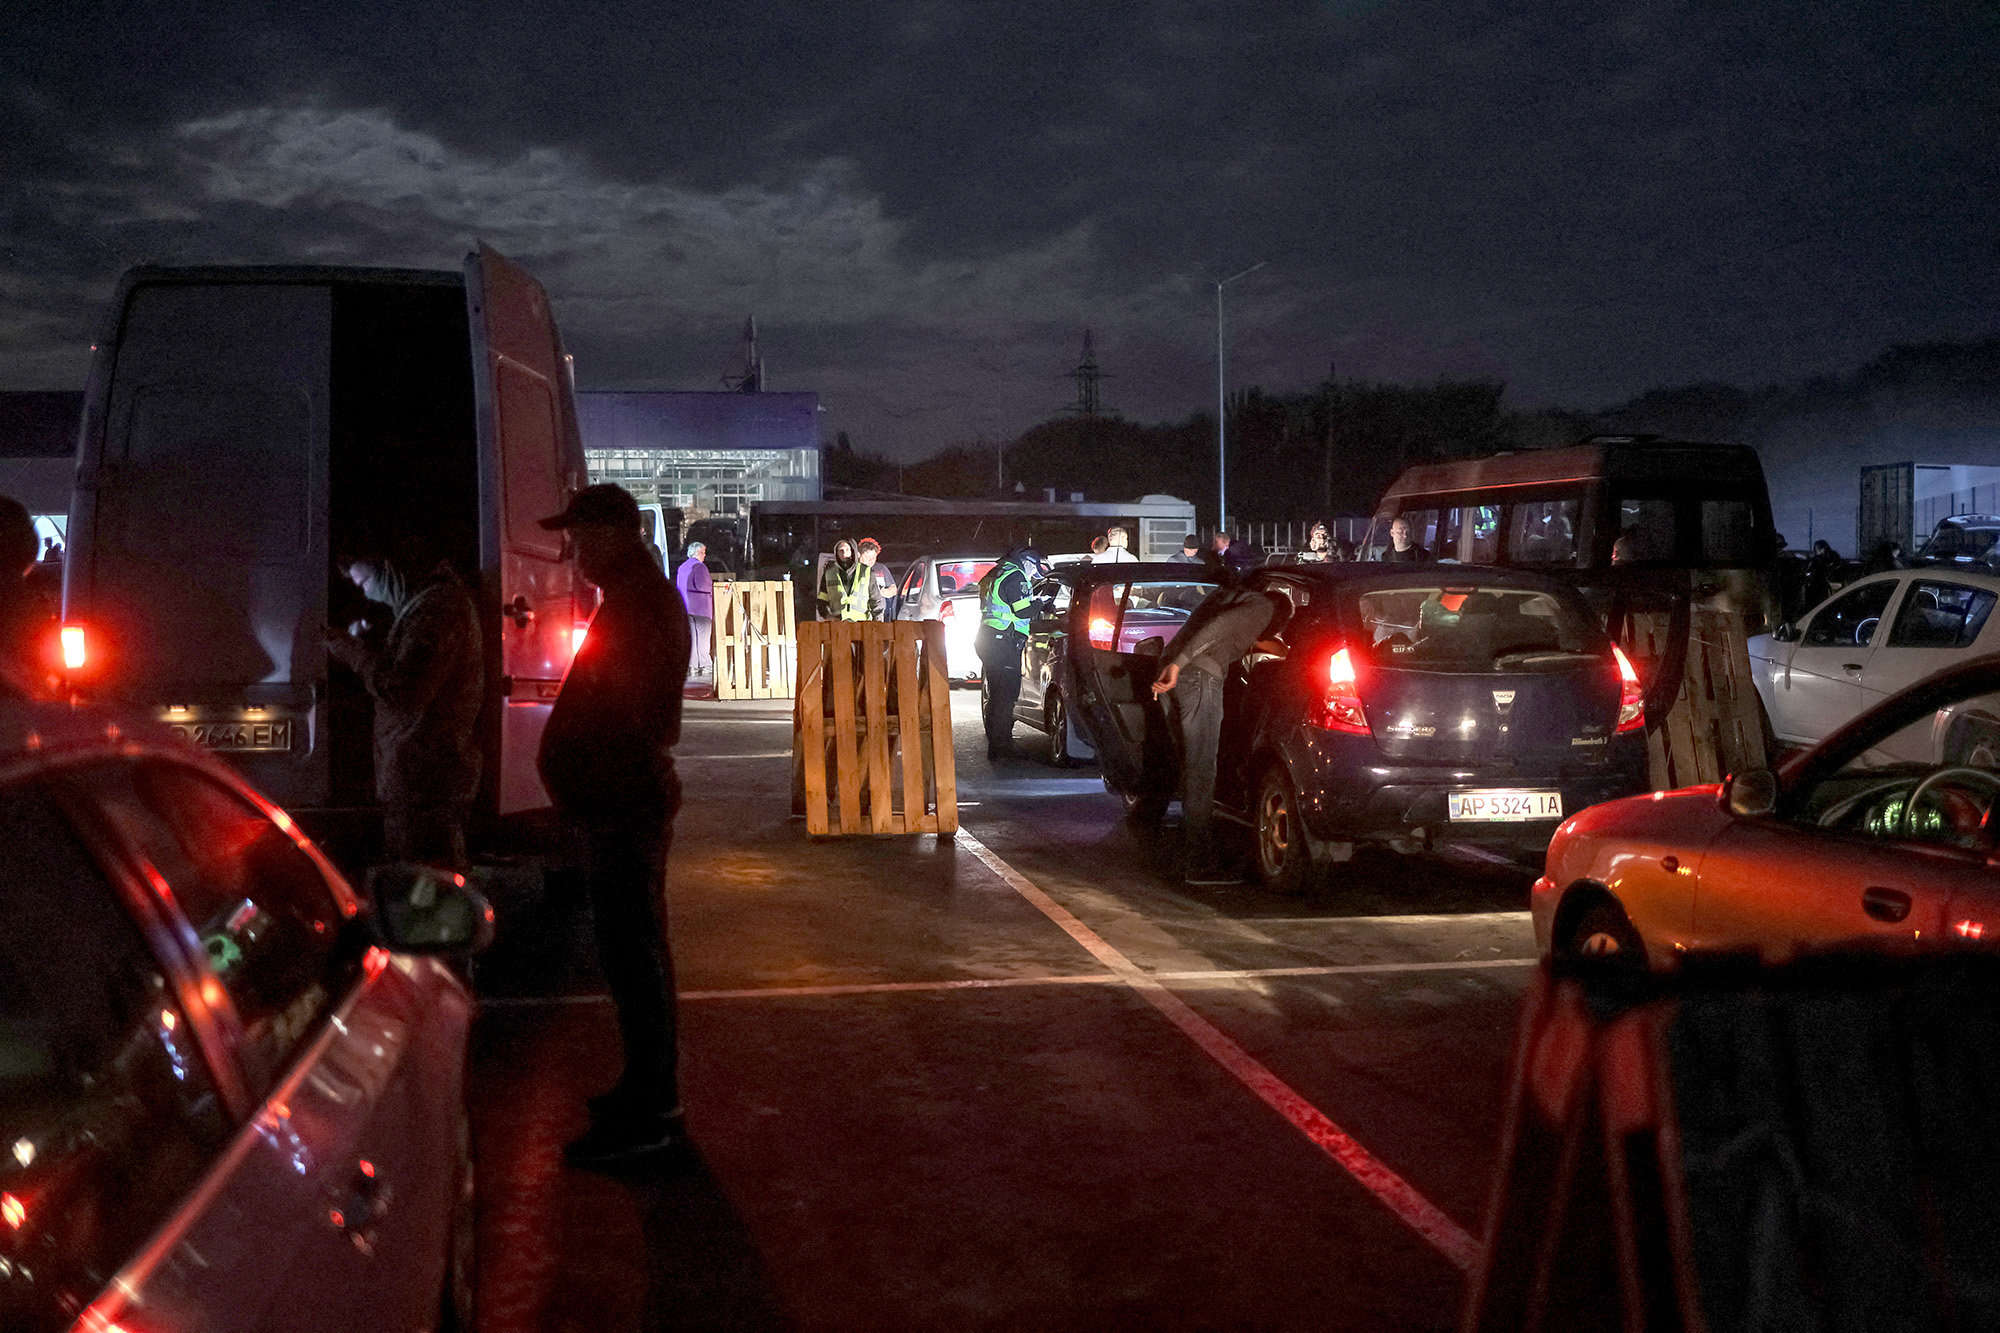 Cars carrying Ukrainian refugees from Mariupol arrive at a registration and humanitarian aid center in Zaporizhzhia, Ukraine, on May 14.